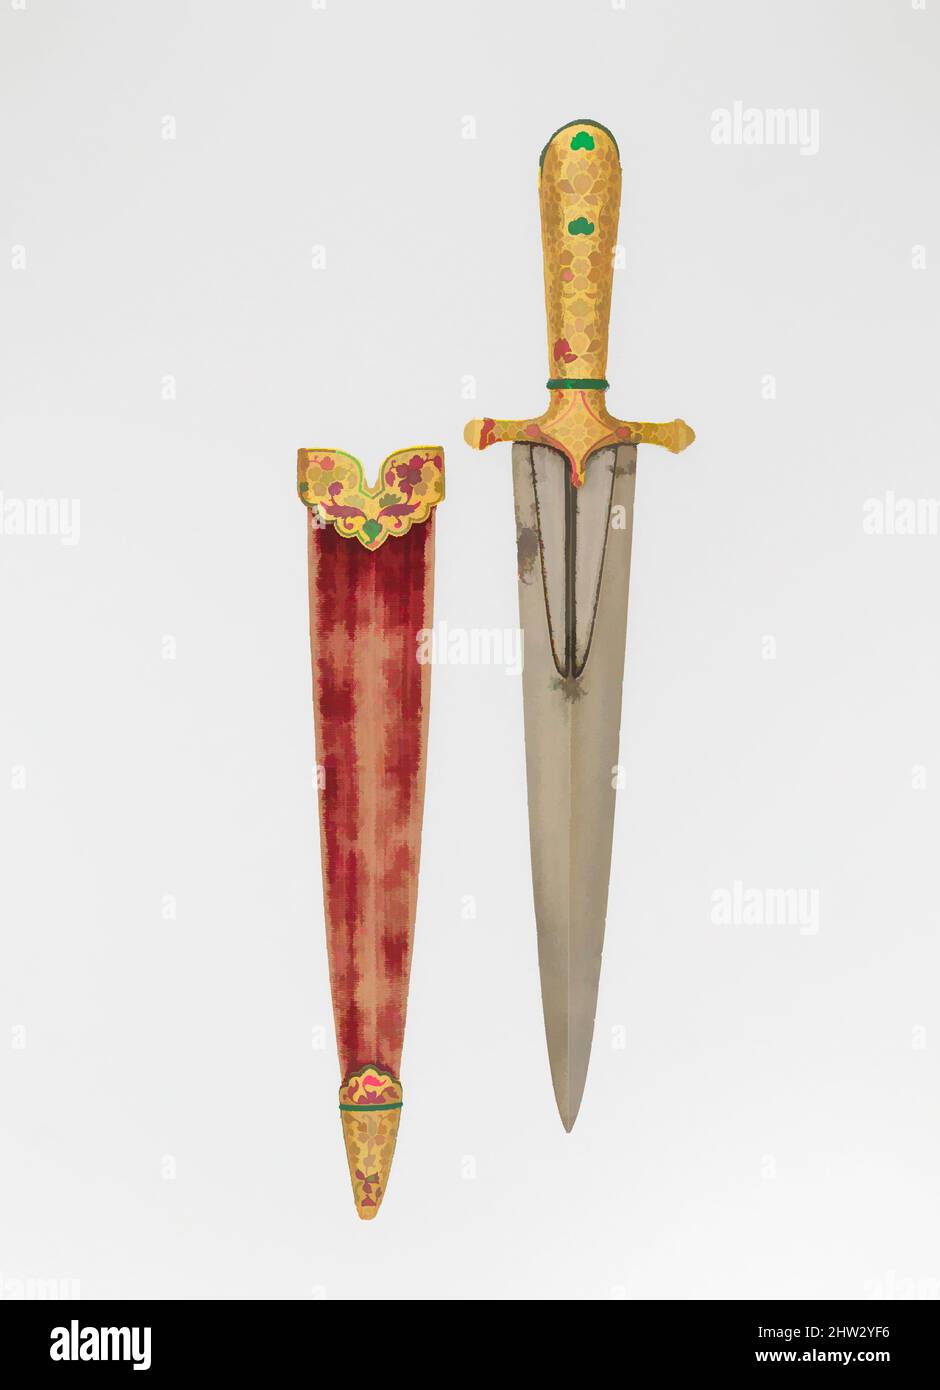 Art inspired by Dagger with Scabbard, 1605–27, Indian, Mughal, Steel, iron, gold, rubies, emeralds, glass, wood, textile, L. 14 5/8 in. (37.1 cm); L. without scabbard 13 15/16 in. (35.4 cm); L. of grip 4 13/16 in. (12.2 cm); L. of blade 9 1/8 in. (23.2 cm); W. of grip 1 3/4 in. (4.4 cm, Classic works modernized by Artotop with a splash of modernity. Shapes, color and value, eye-catching visual impact on art. Emotions through freedom of artworks in a contemporary way. A timeless message pursuing a wildly creative new direction. Artists turning to the digital medium and creating the Artotop NFT Stock Photo